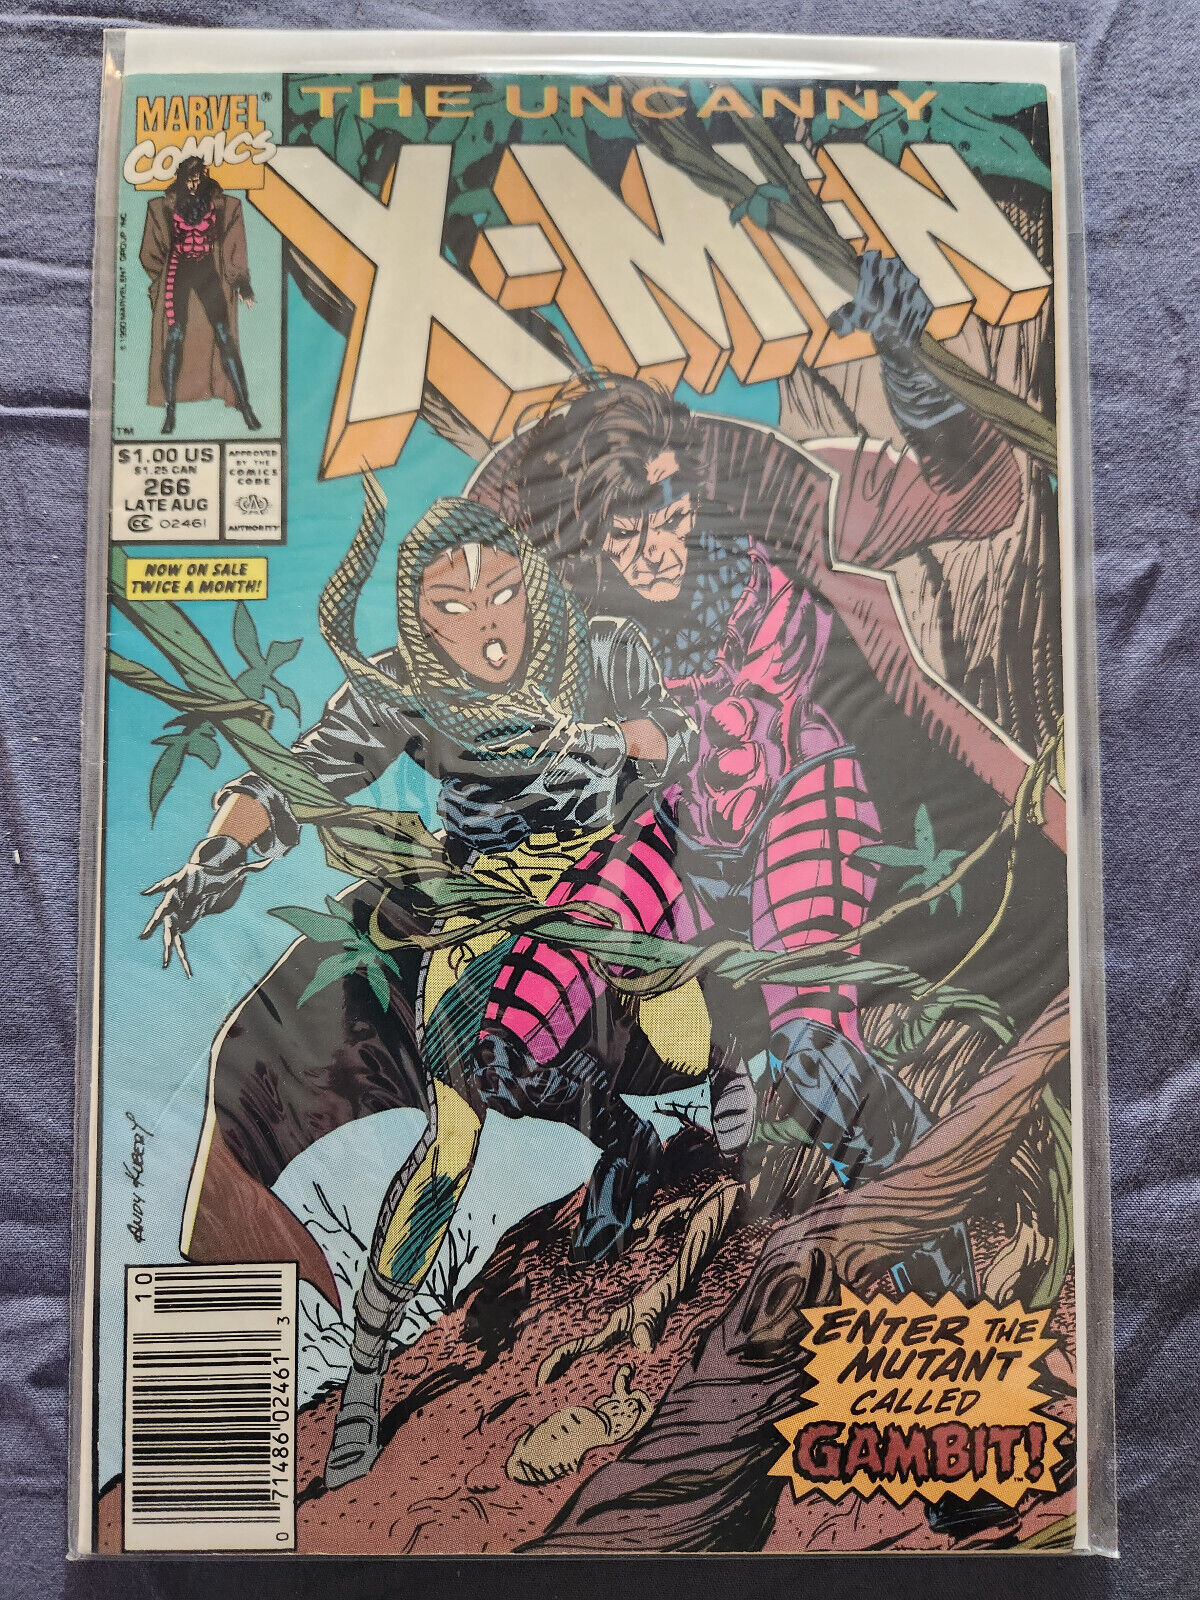 UNCANNY XMEN 266  1990  FIRST COVER AND FULL APPEARANCE OF GAMBIT